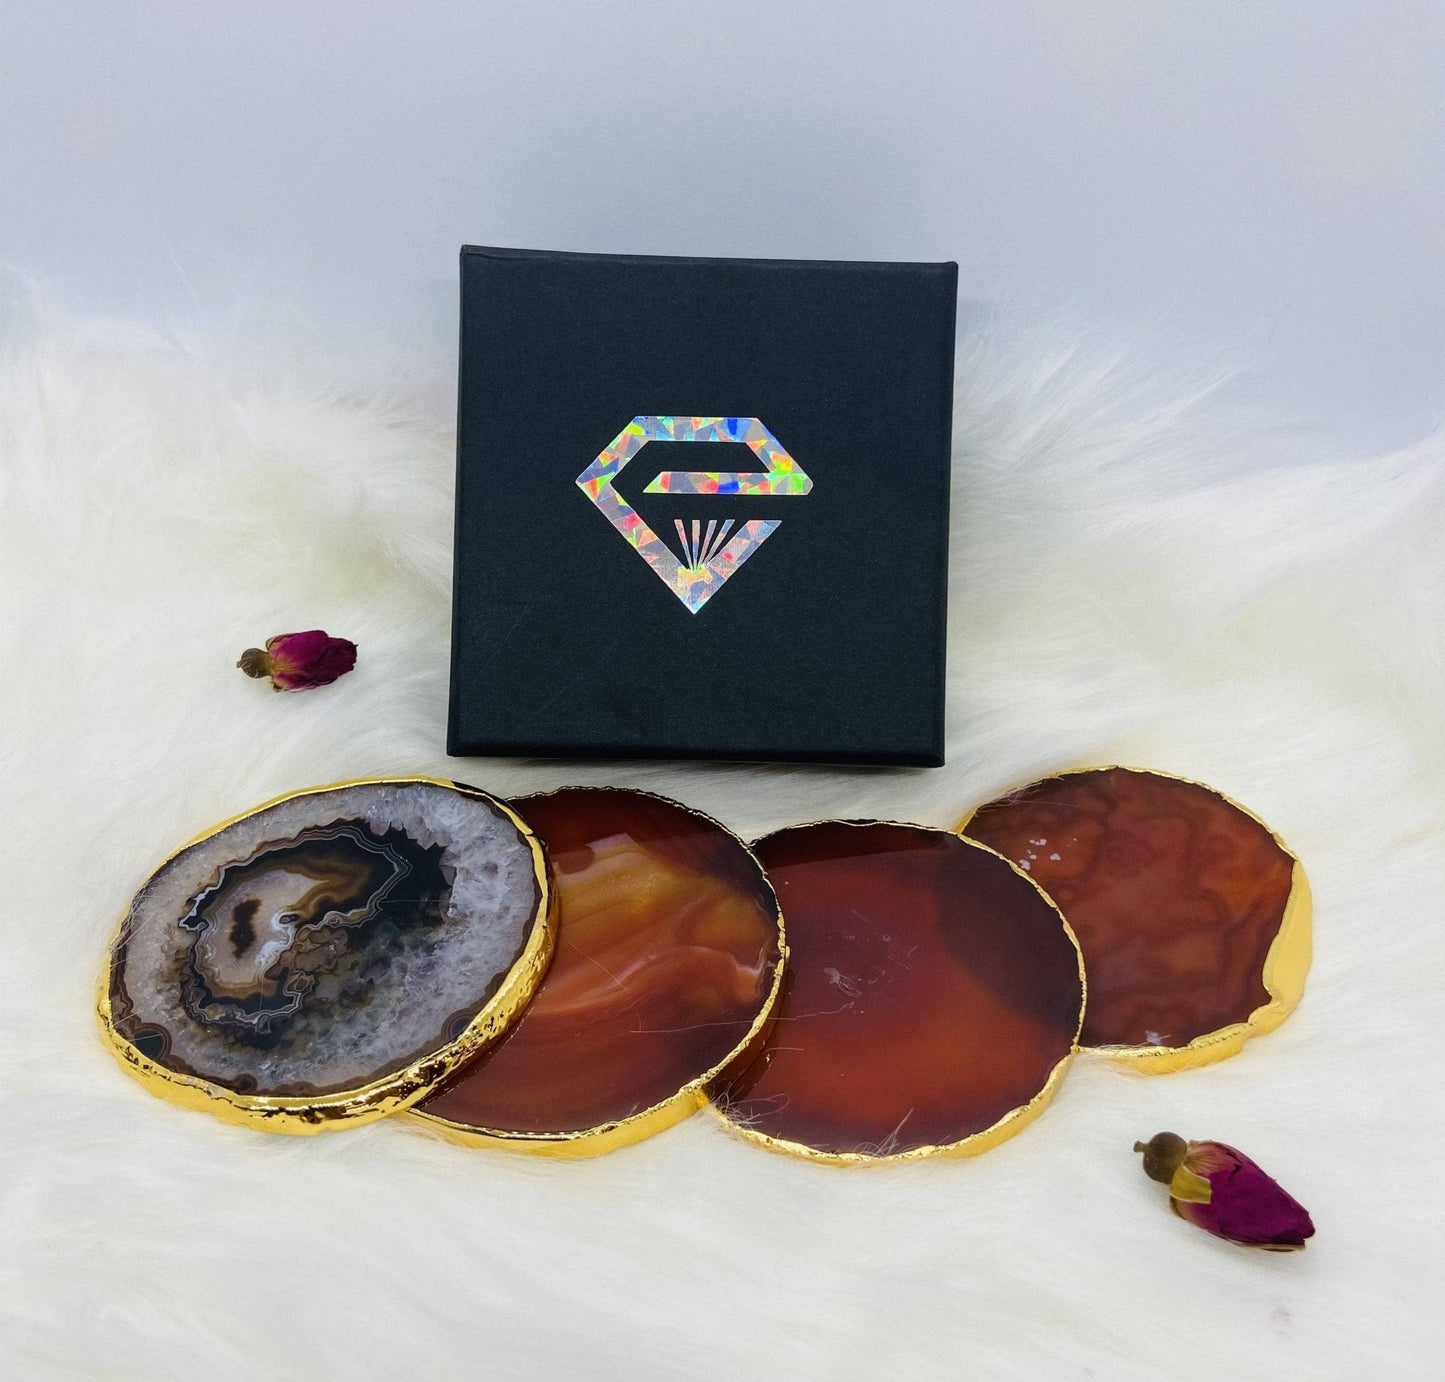 Natural Chalcedony Luxury Agate Round Coasters - Black Diamonds New York-Black Diamonds New York